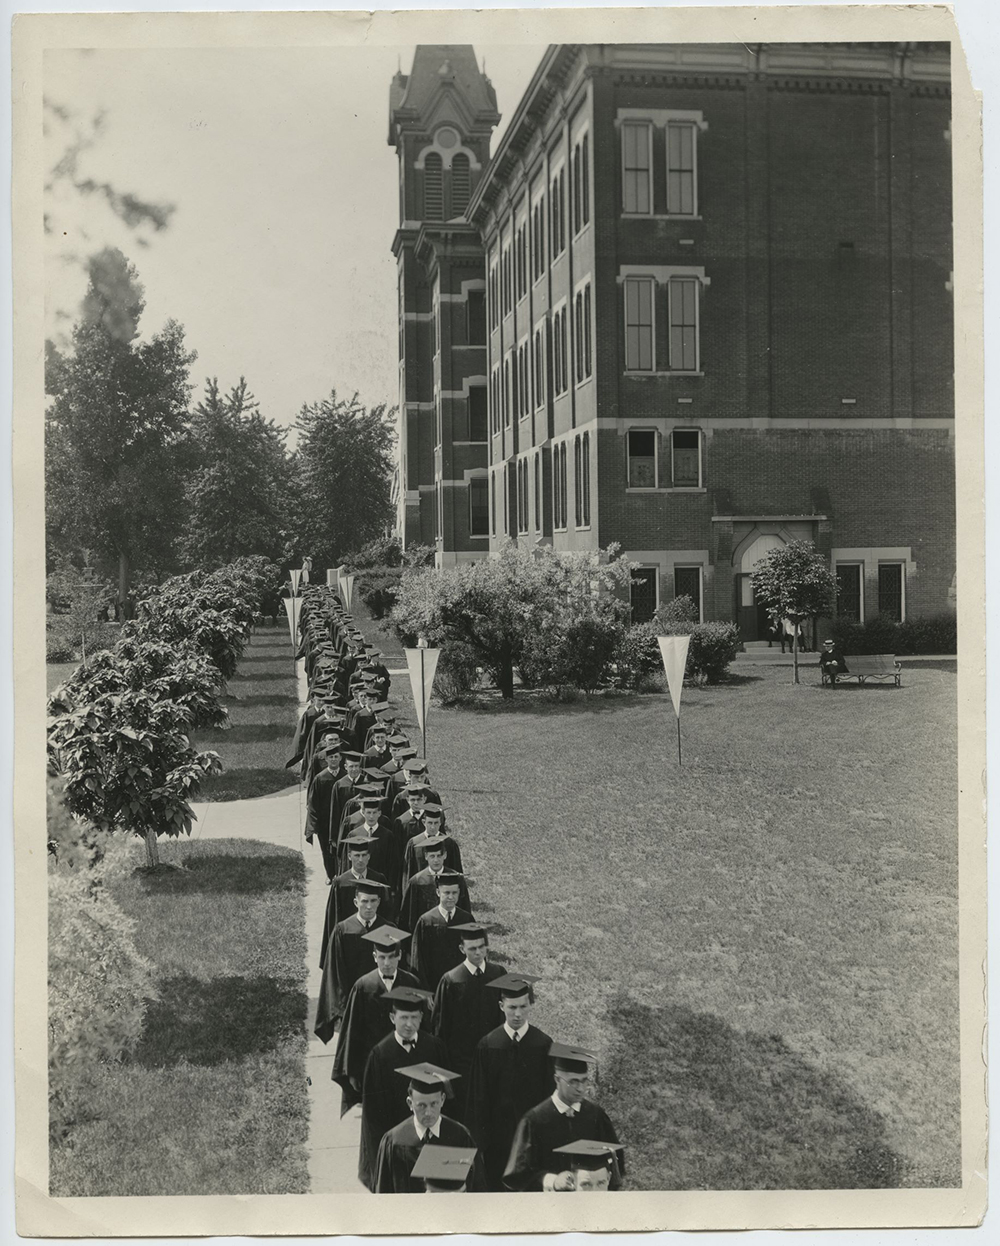 Image of Creighton graduation from the 1920s.